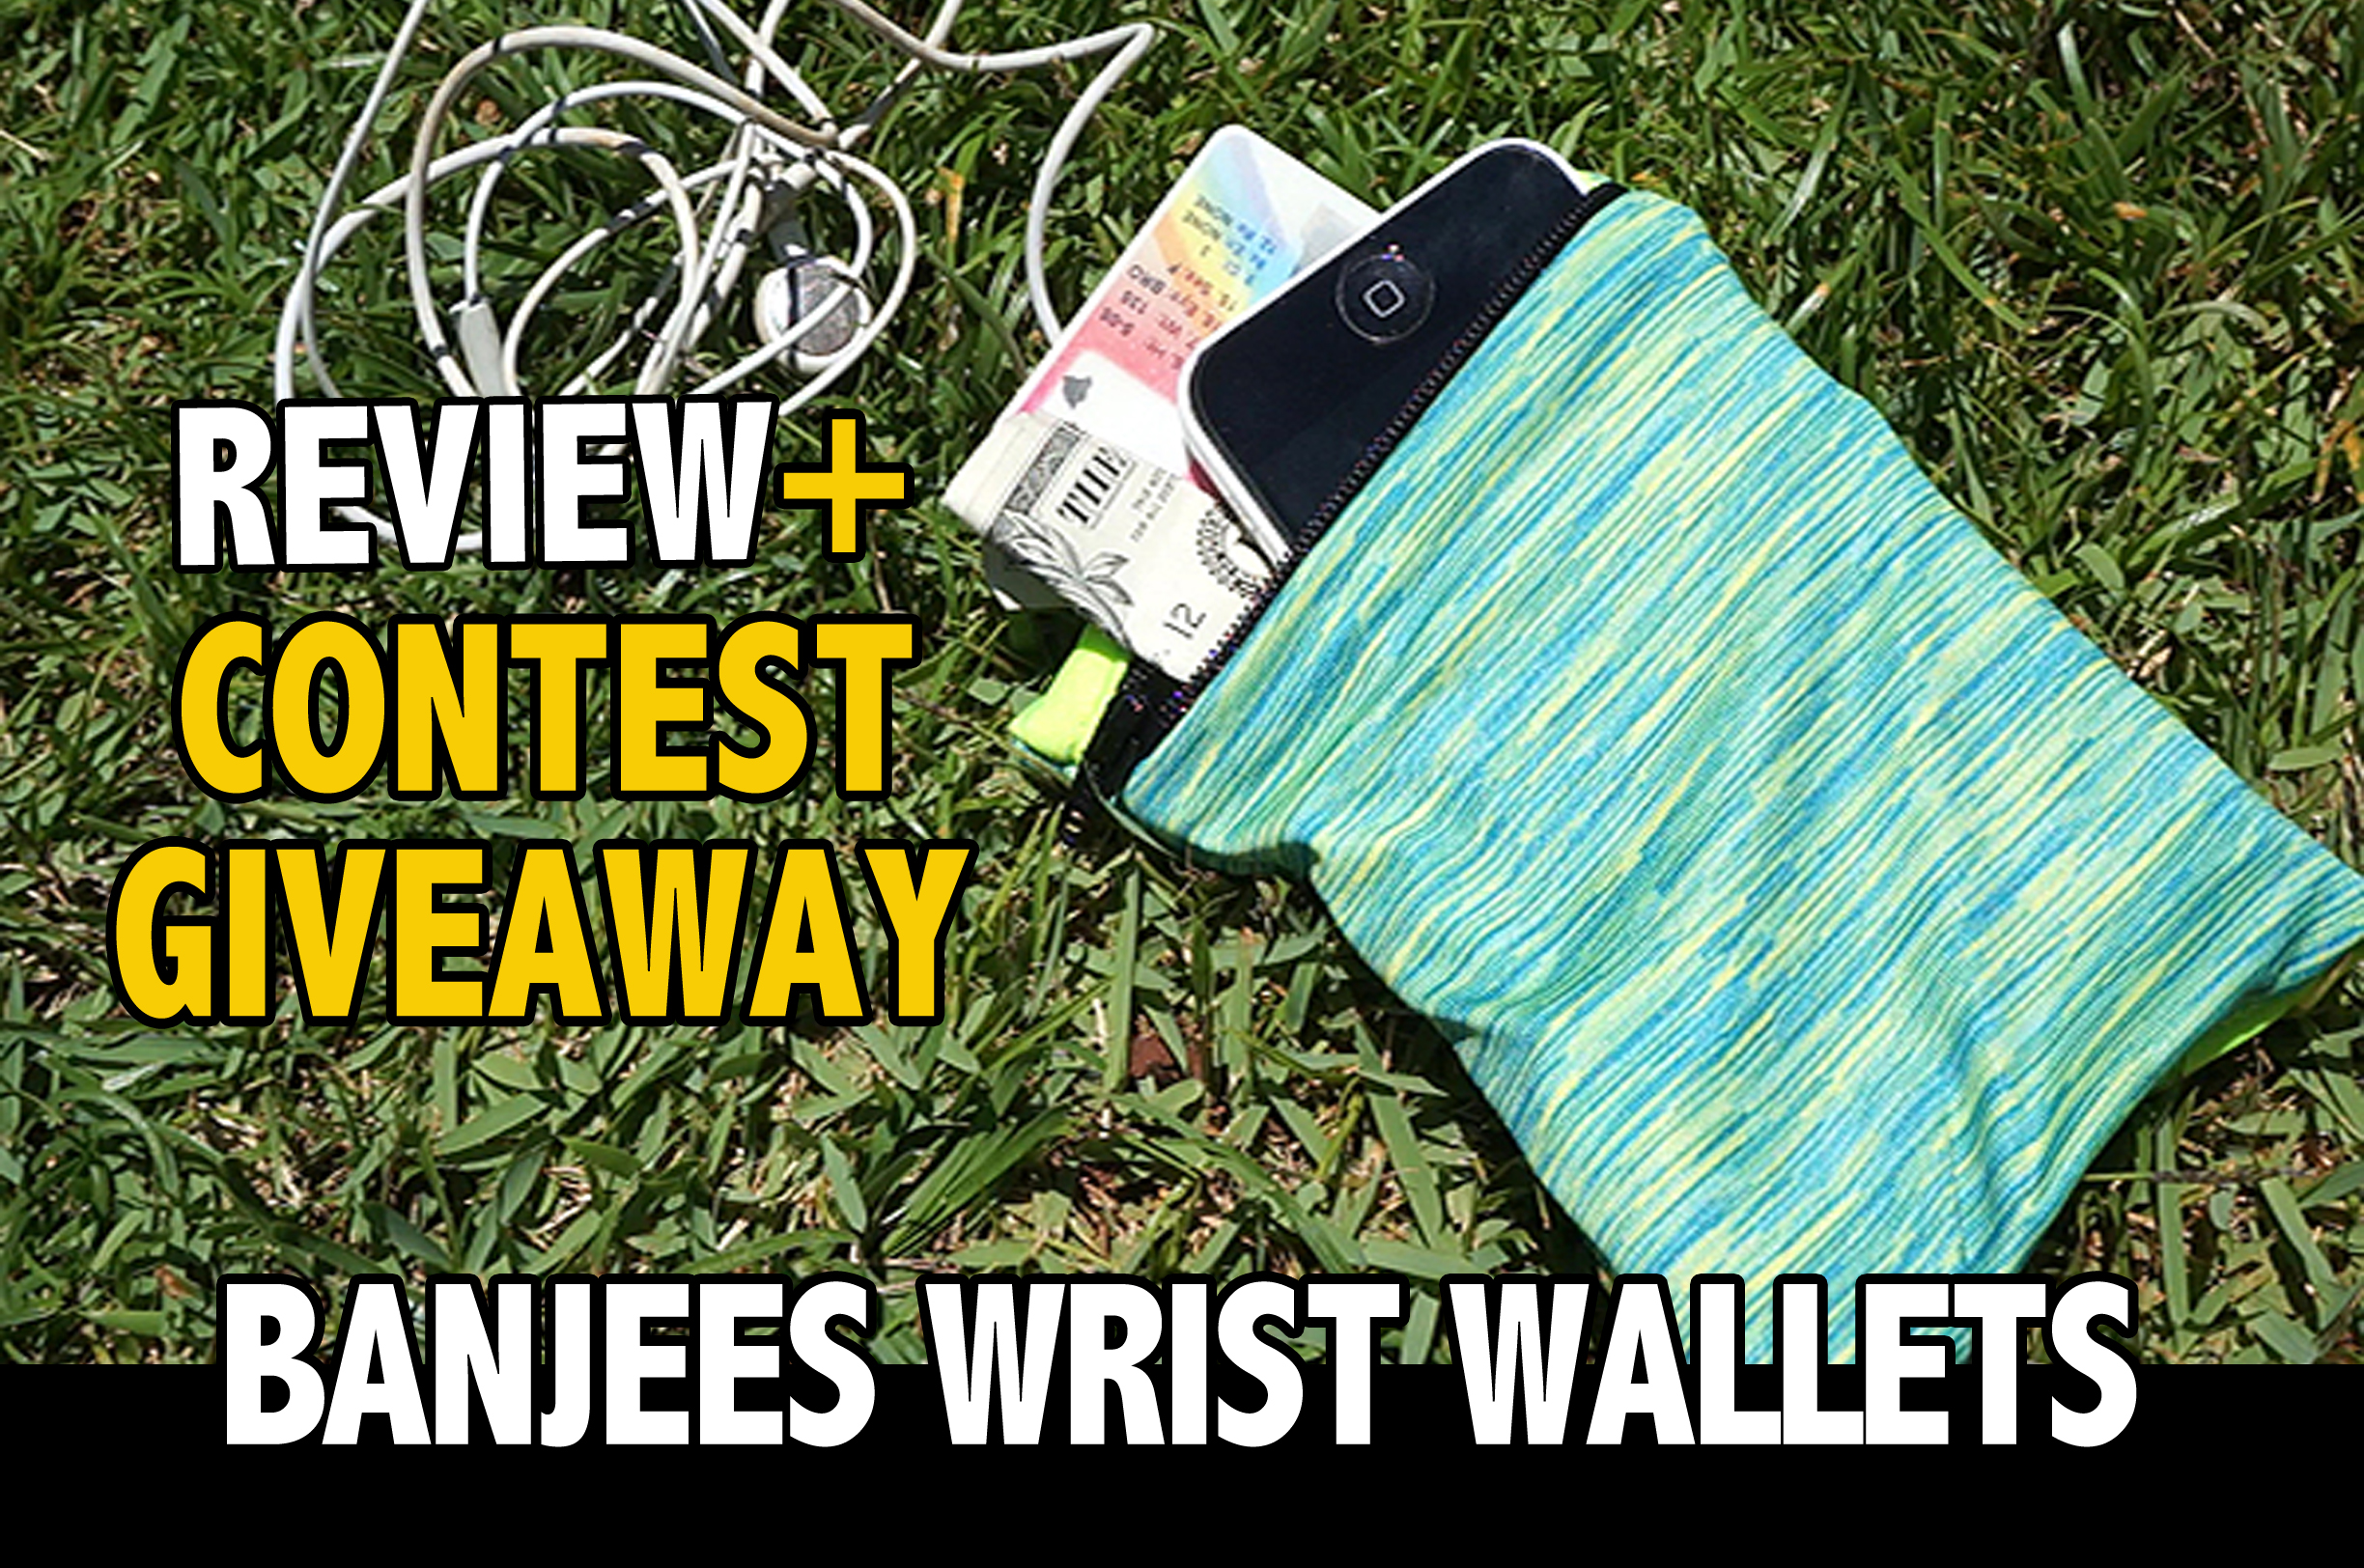 Banjees Wrist Wallets review giveaway